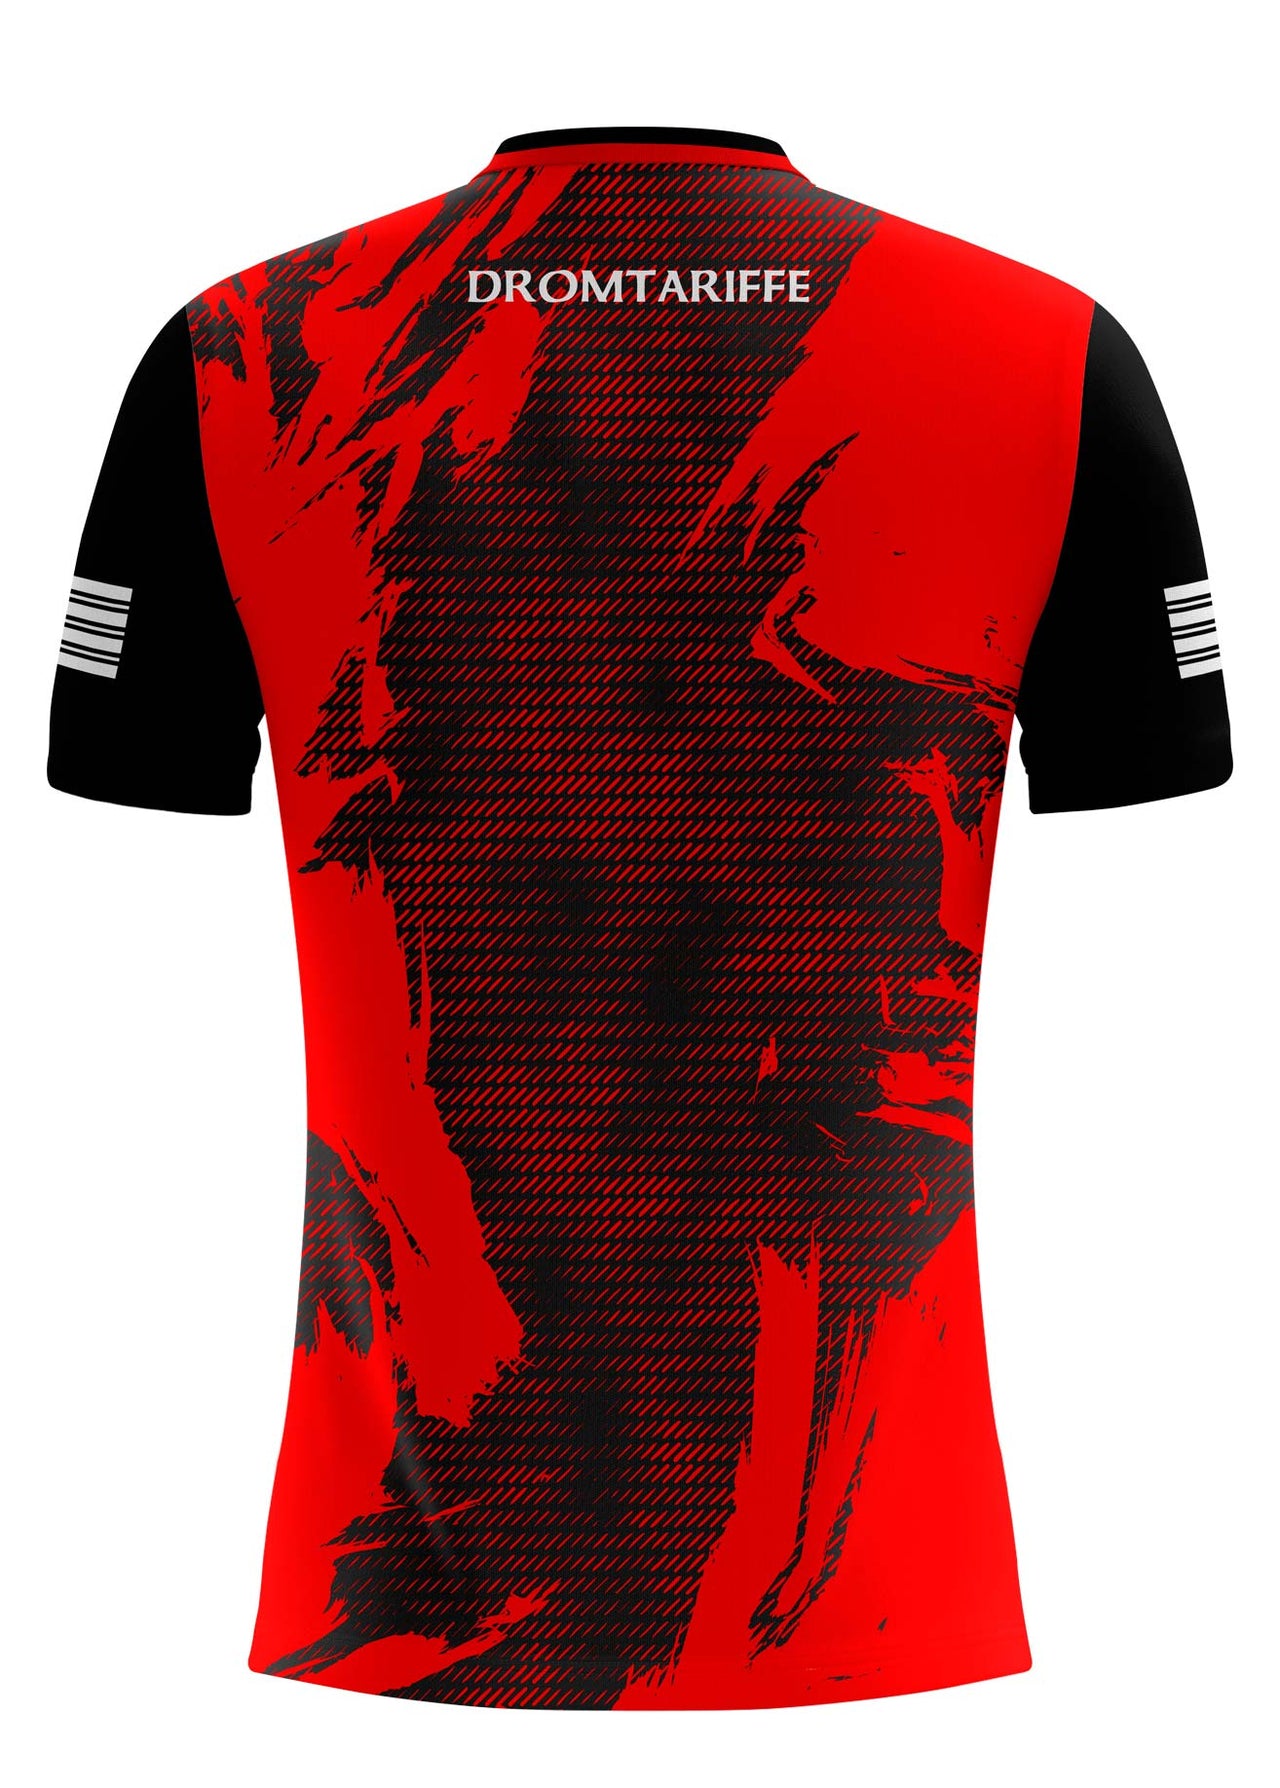 Dromtarriffe CLG Boa Style Training Jersey Player Fit Adult